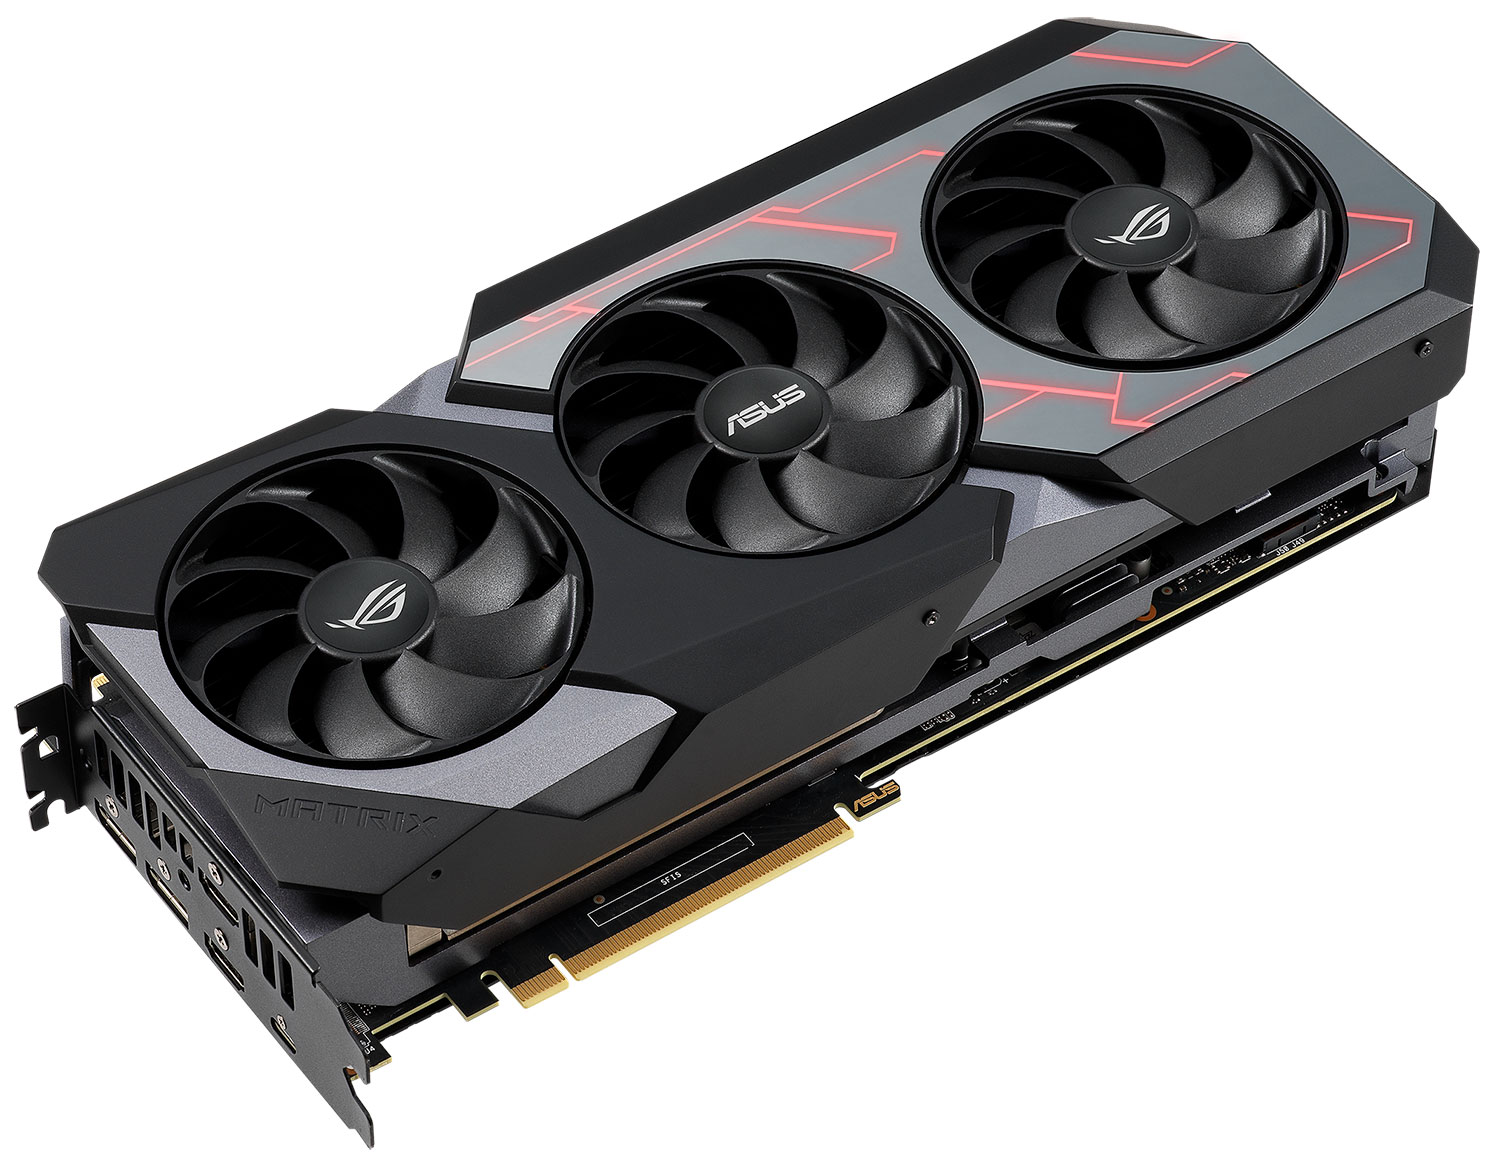 CES 2019: ASUS Unveils the ROG Matrix RTX 2080 Ti With Hybrid Cooling